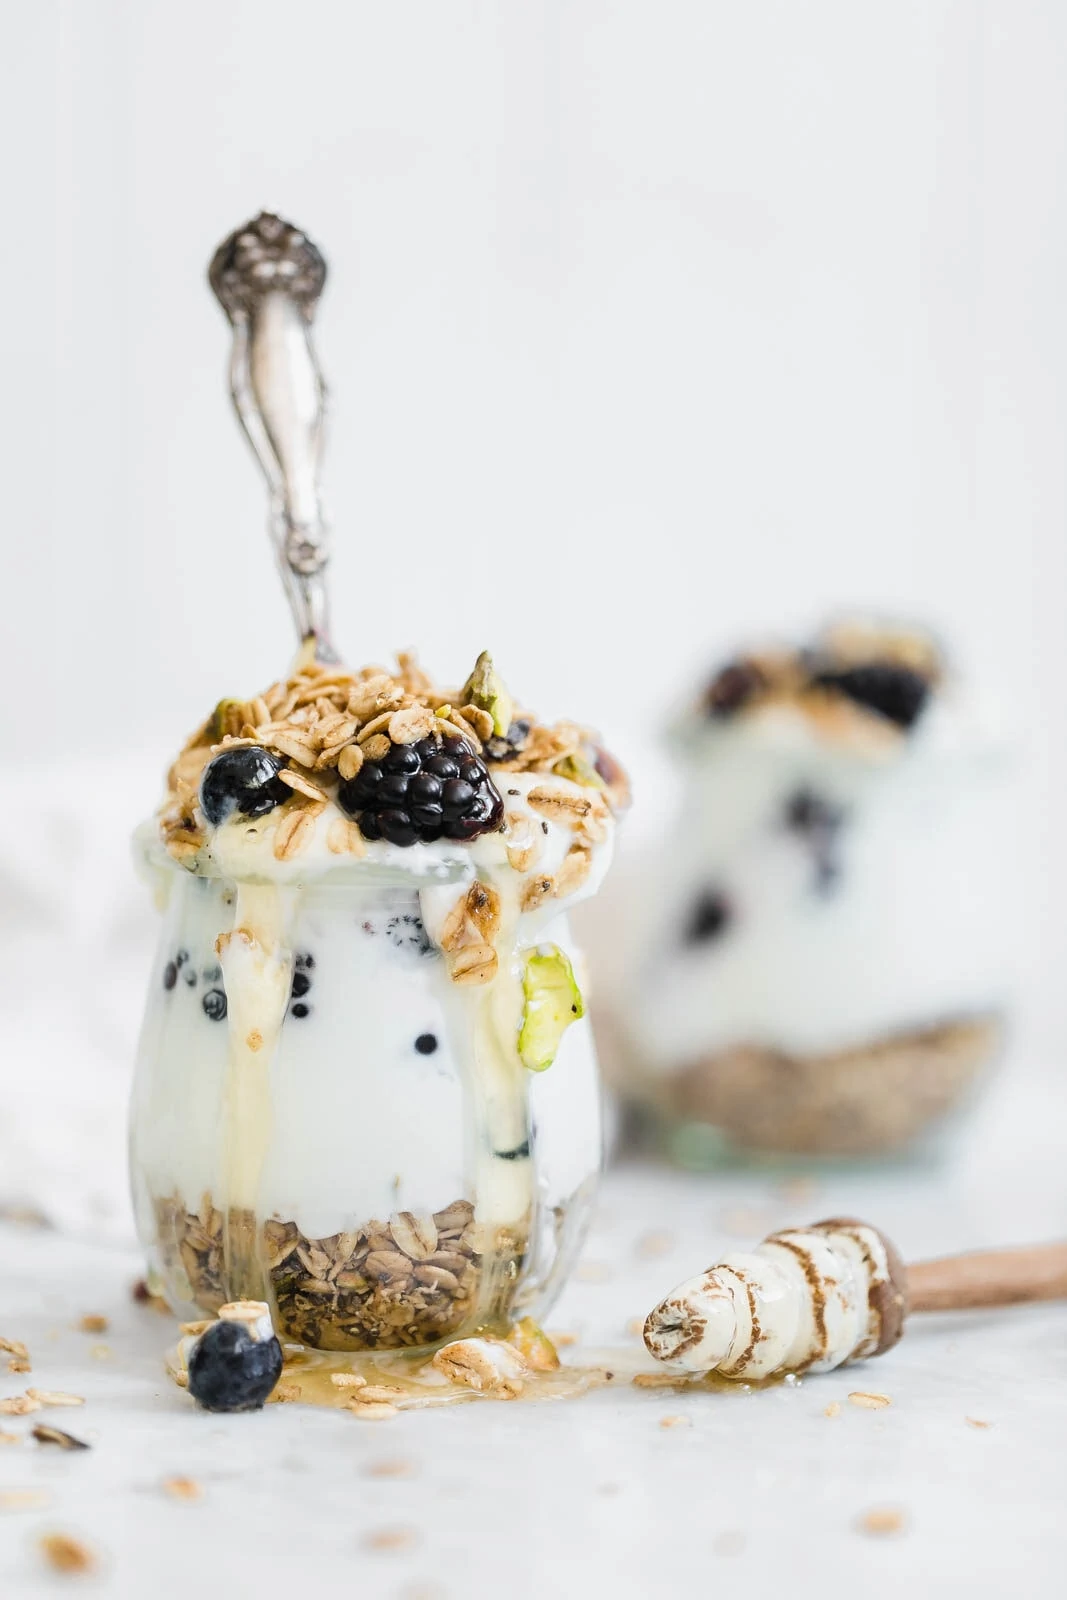 Chai Spiced Chia Overnight Oats - Flavor the Moments